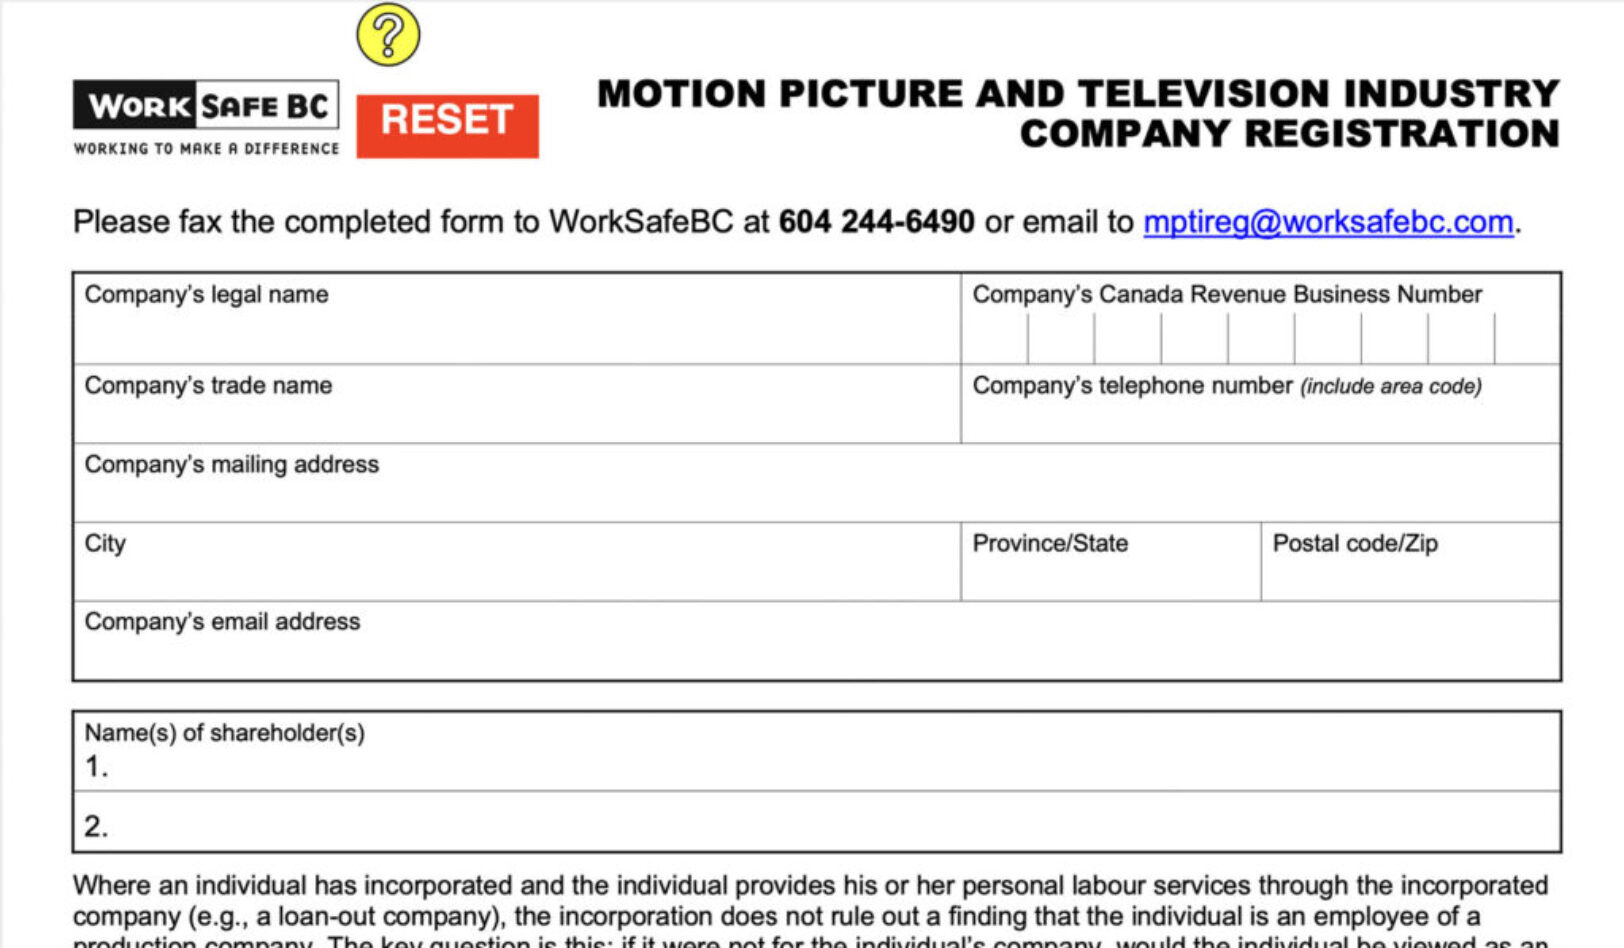 Motion Picture and Television Industry Company Registration (Form 1800MPTI)